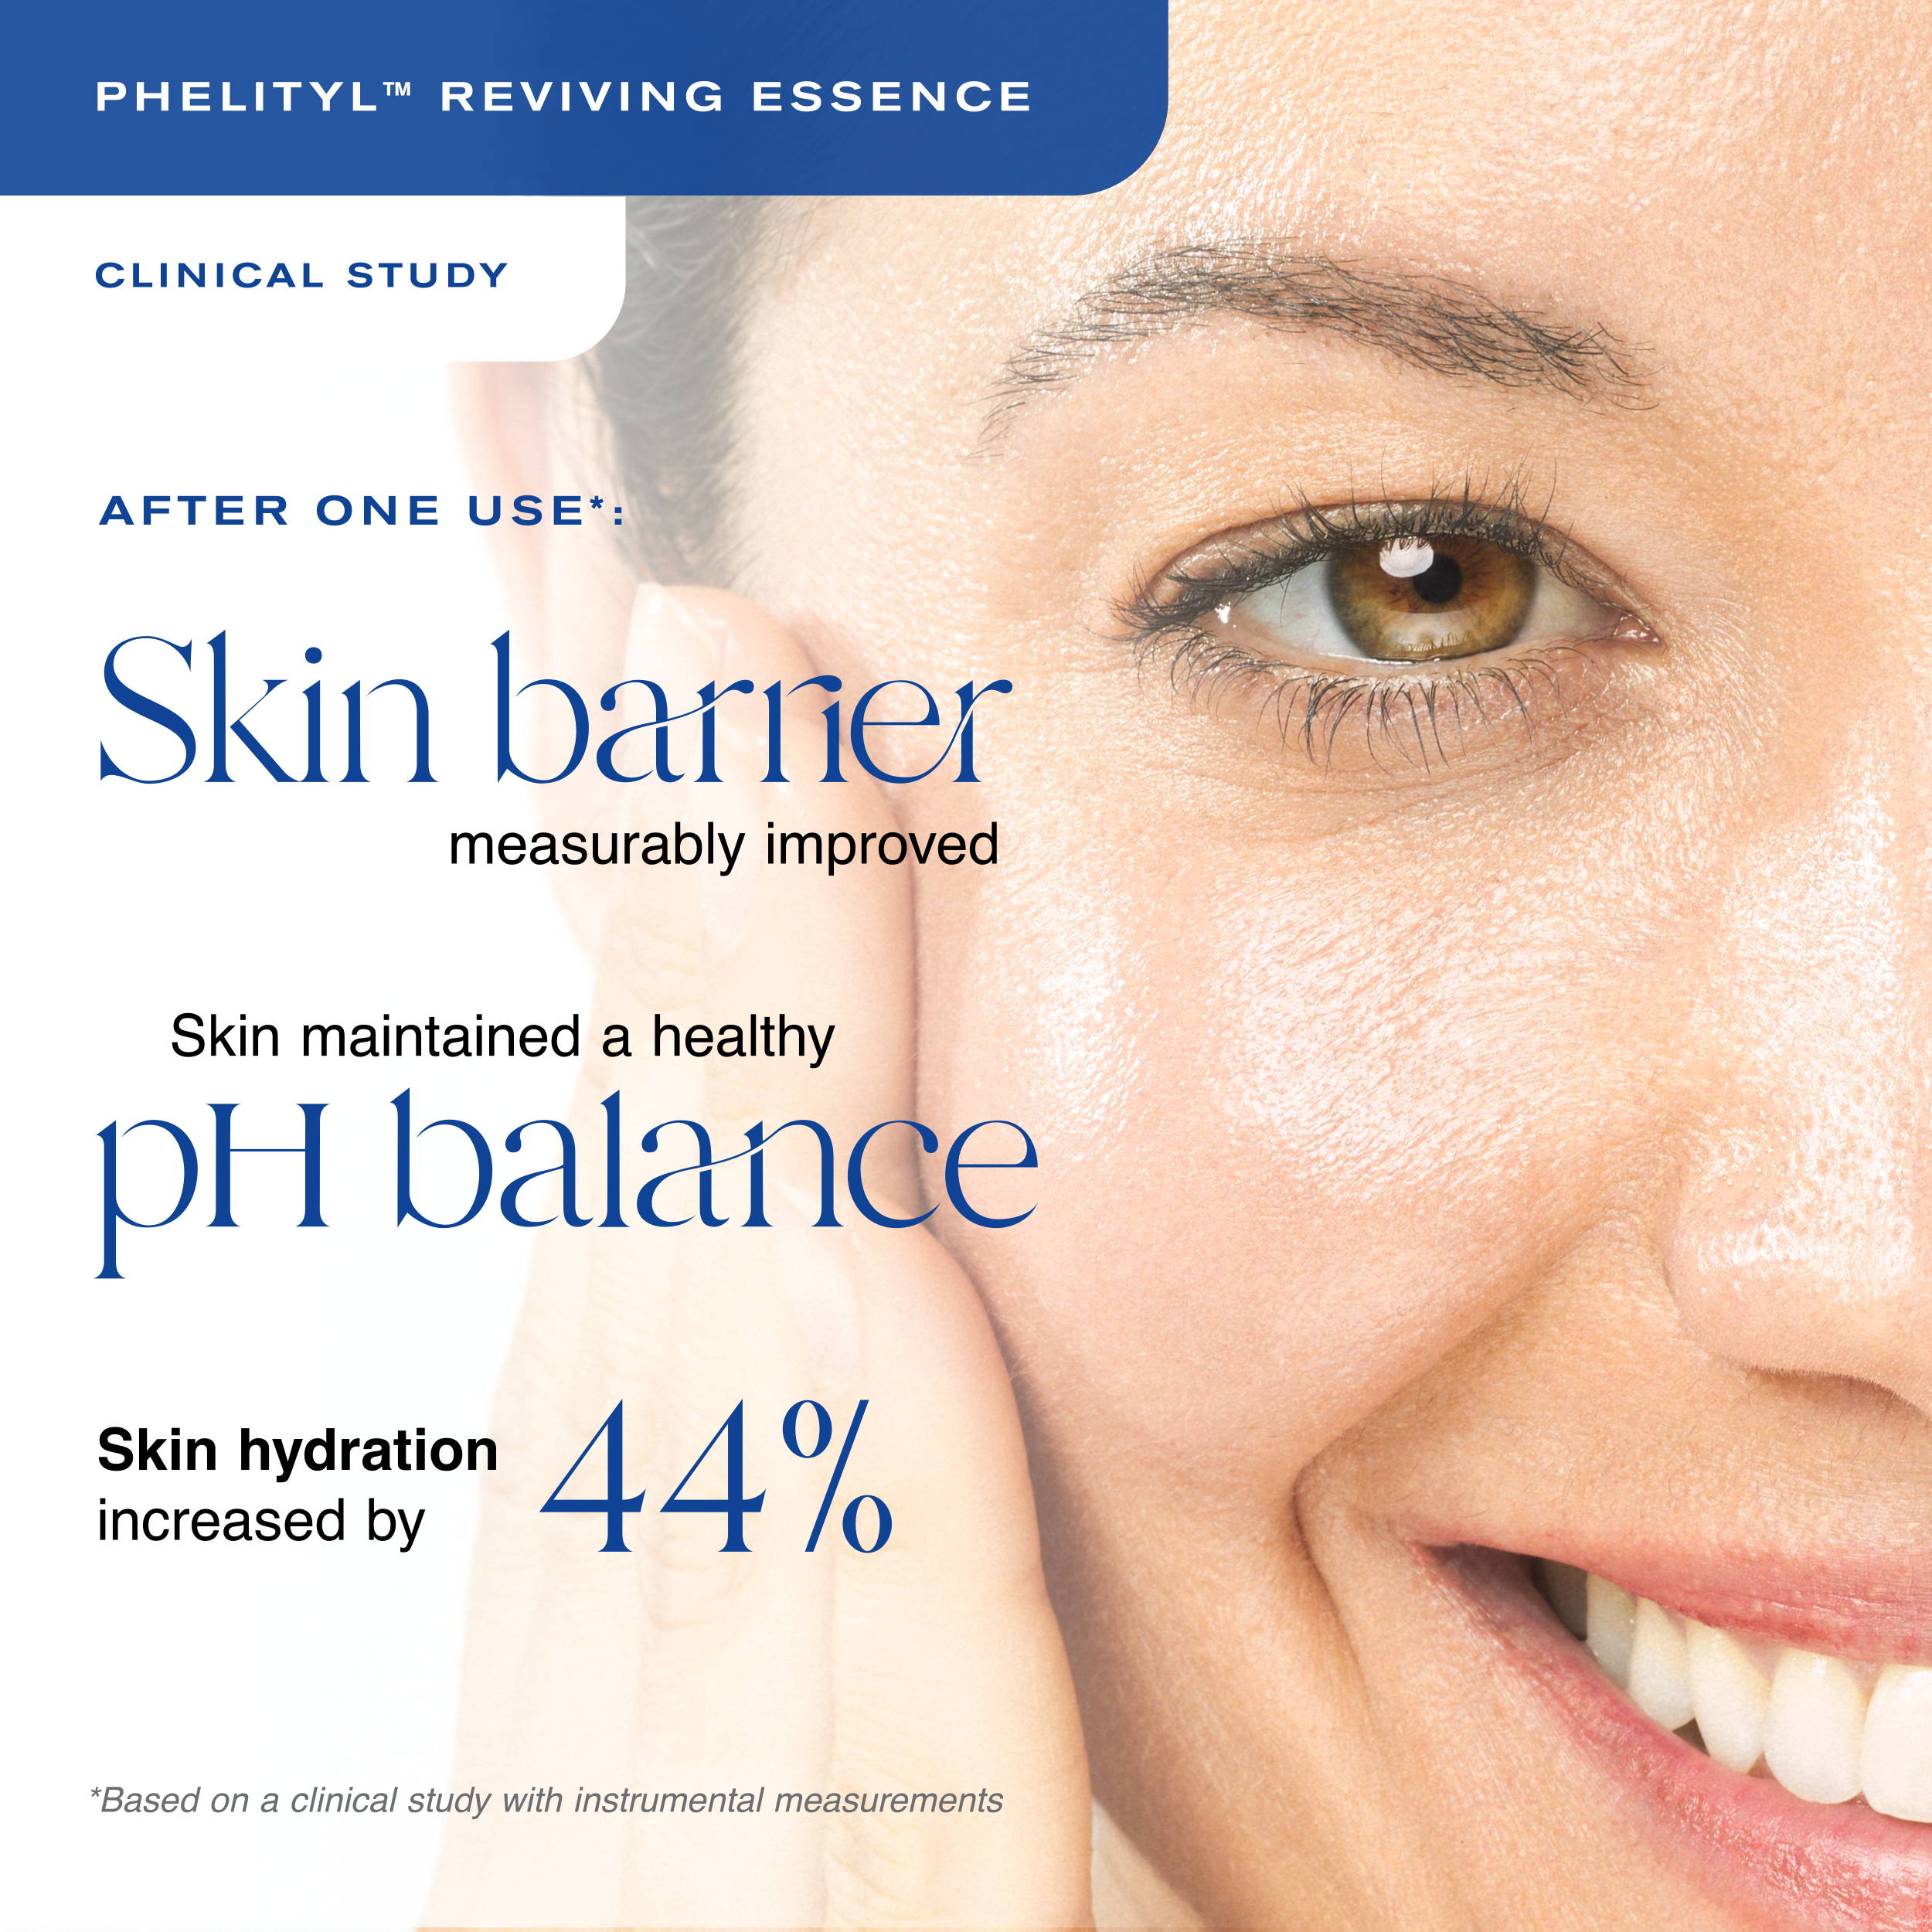 In a Clinical Study • Skin barrier measurably improved • Skin hydration increased by 44% • Skin maintained a healthy pH balance *Based on a clinical study with instrumental measurements